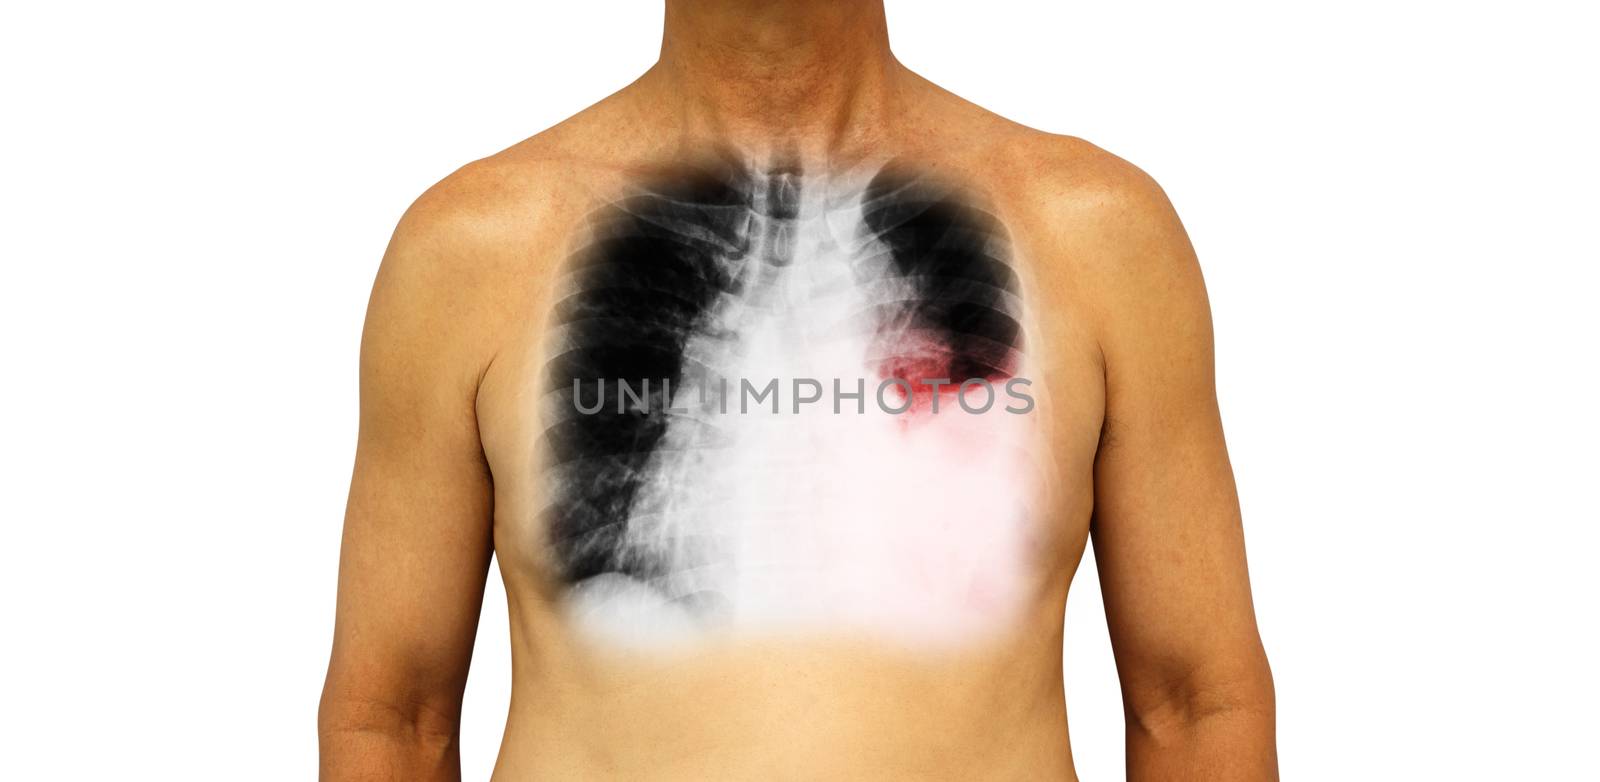 Lung cancer . Human chest and x-ray show pleural effusion left lung due to lung cancer by stockdevil